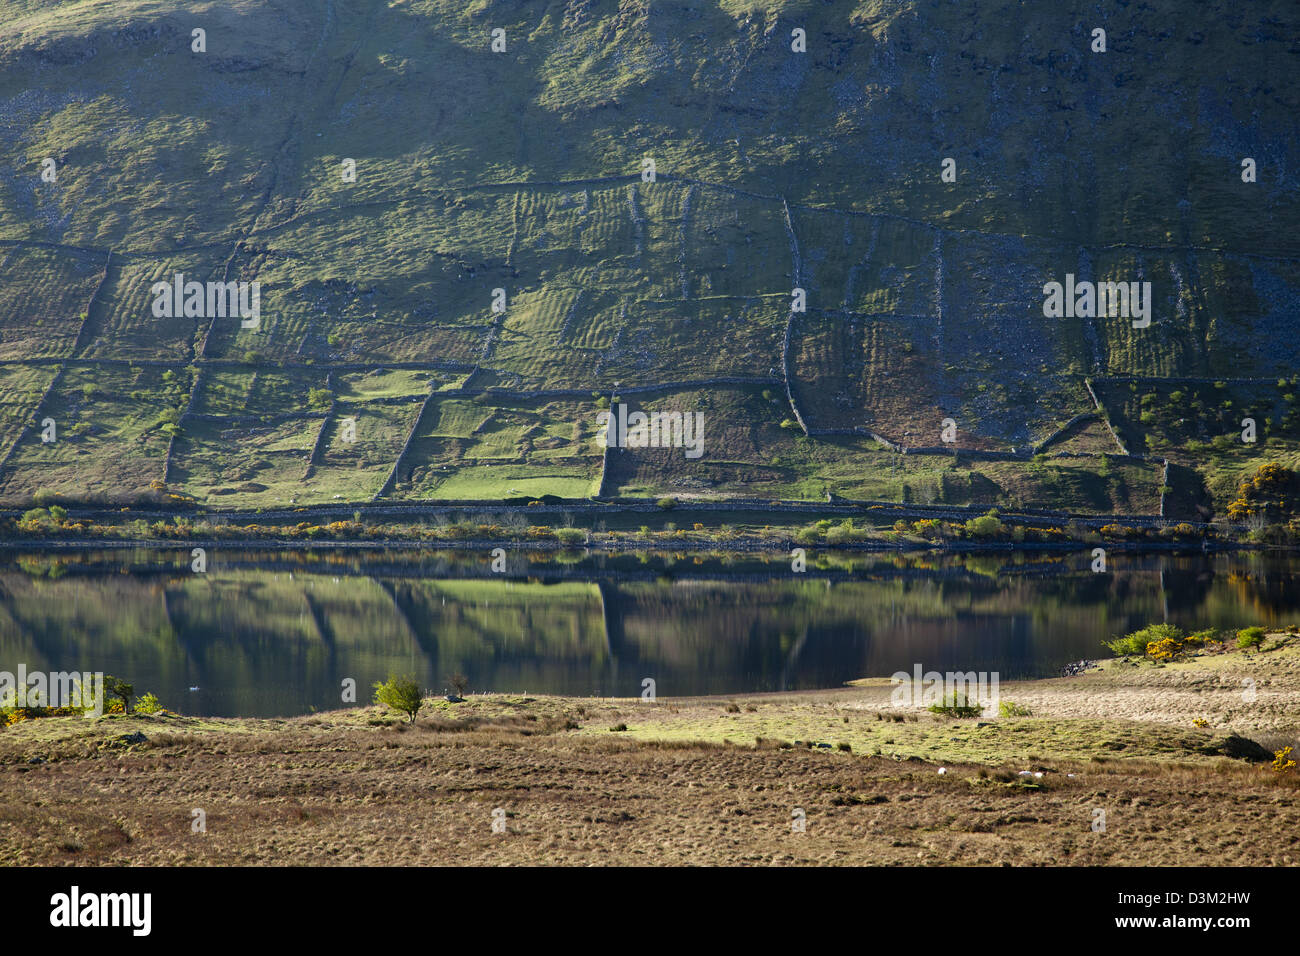 Old boundary walls and lazy beds reflected in Lough Mask, County Mayo, Ireland. Stock Photo